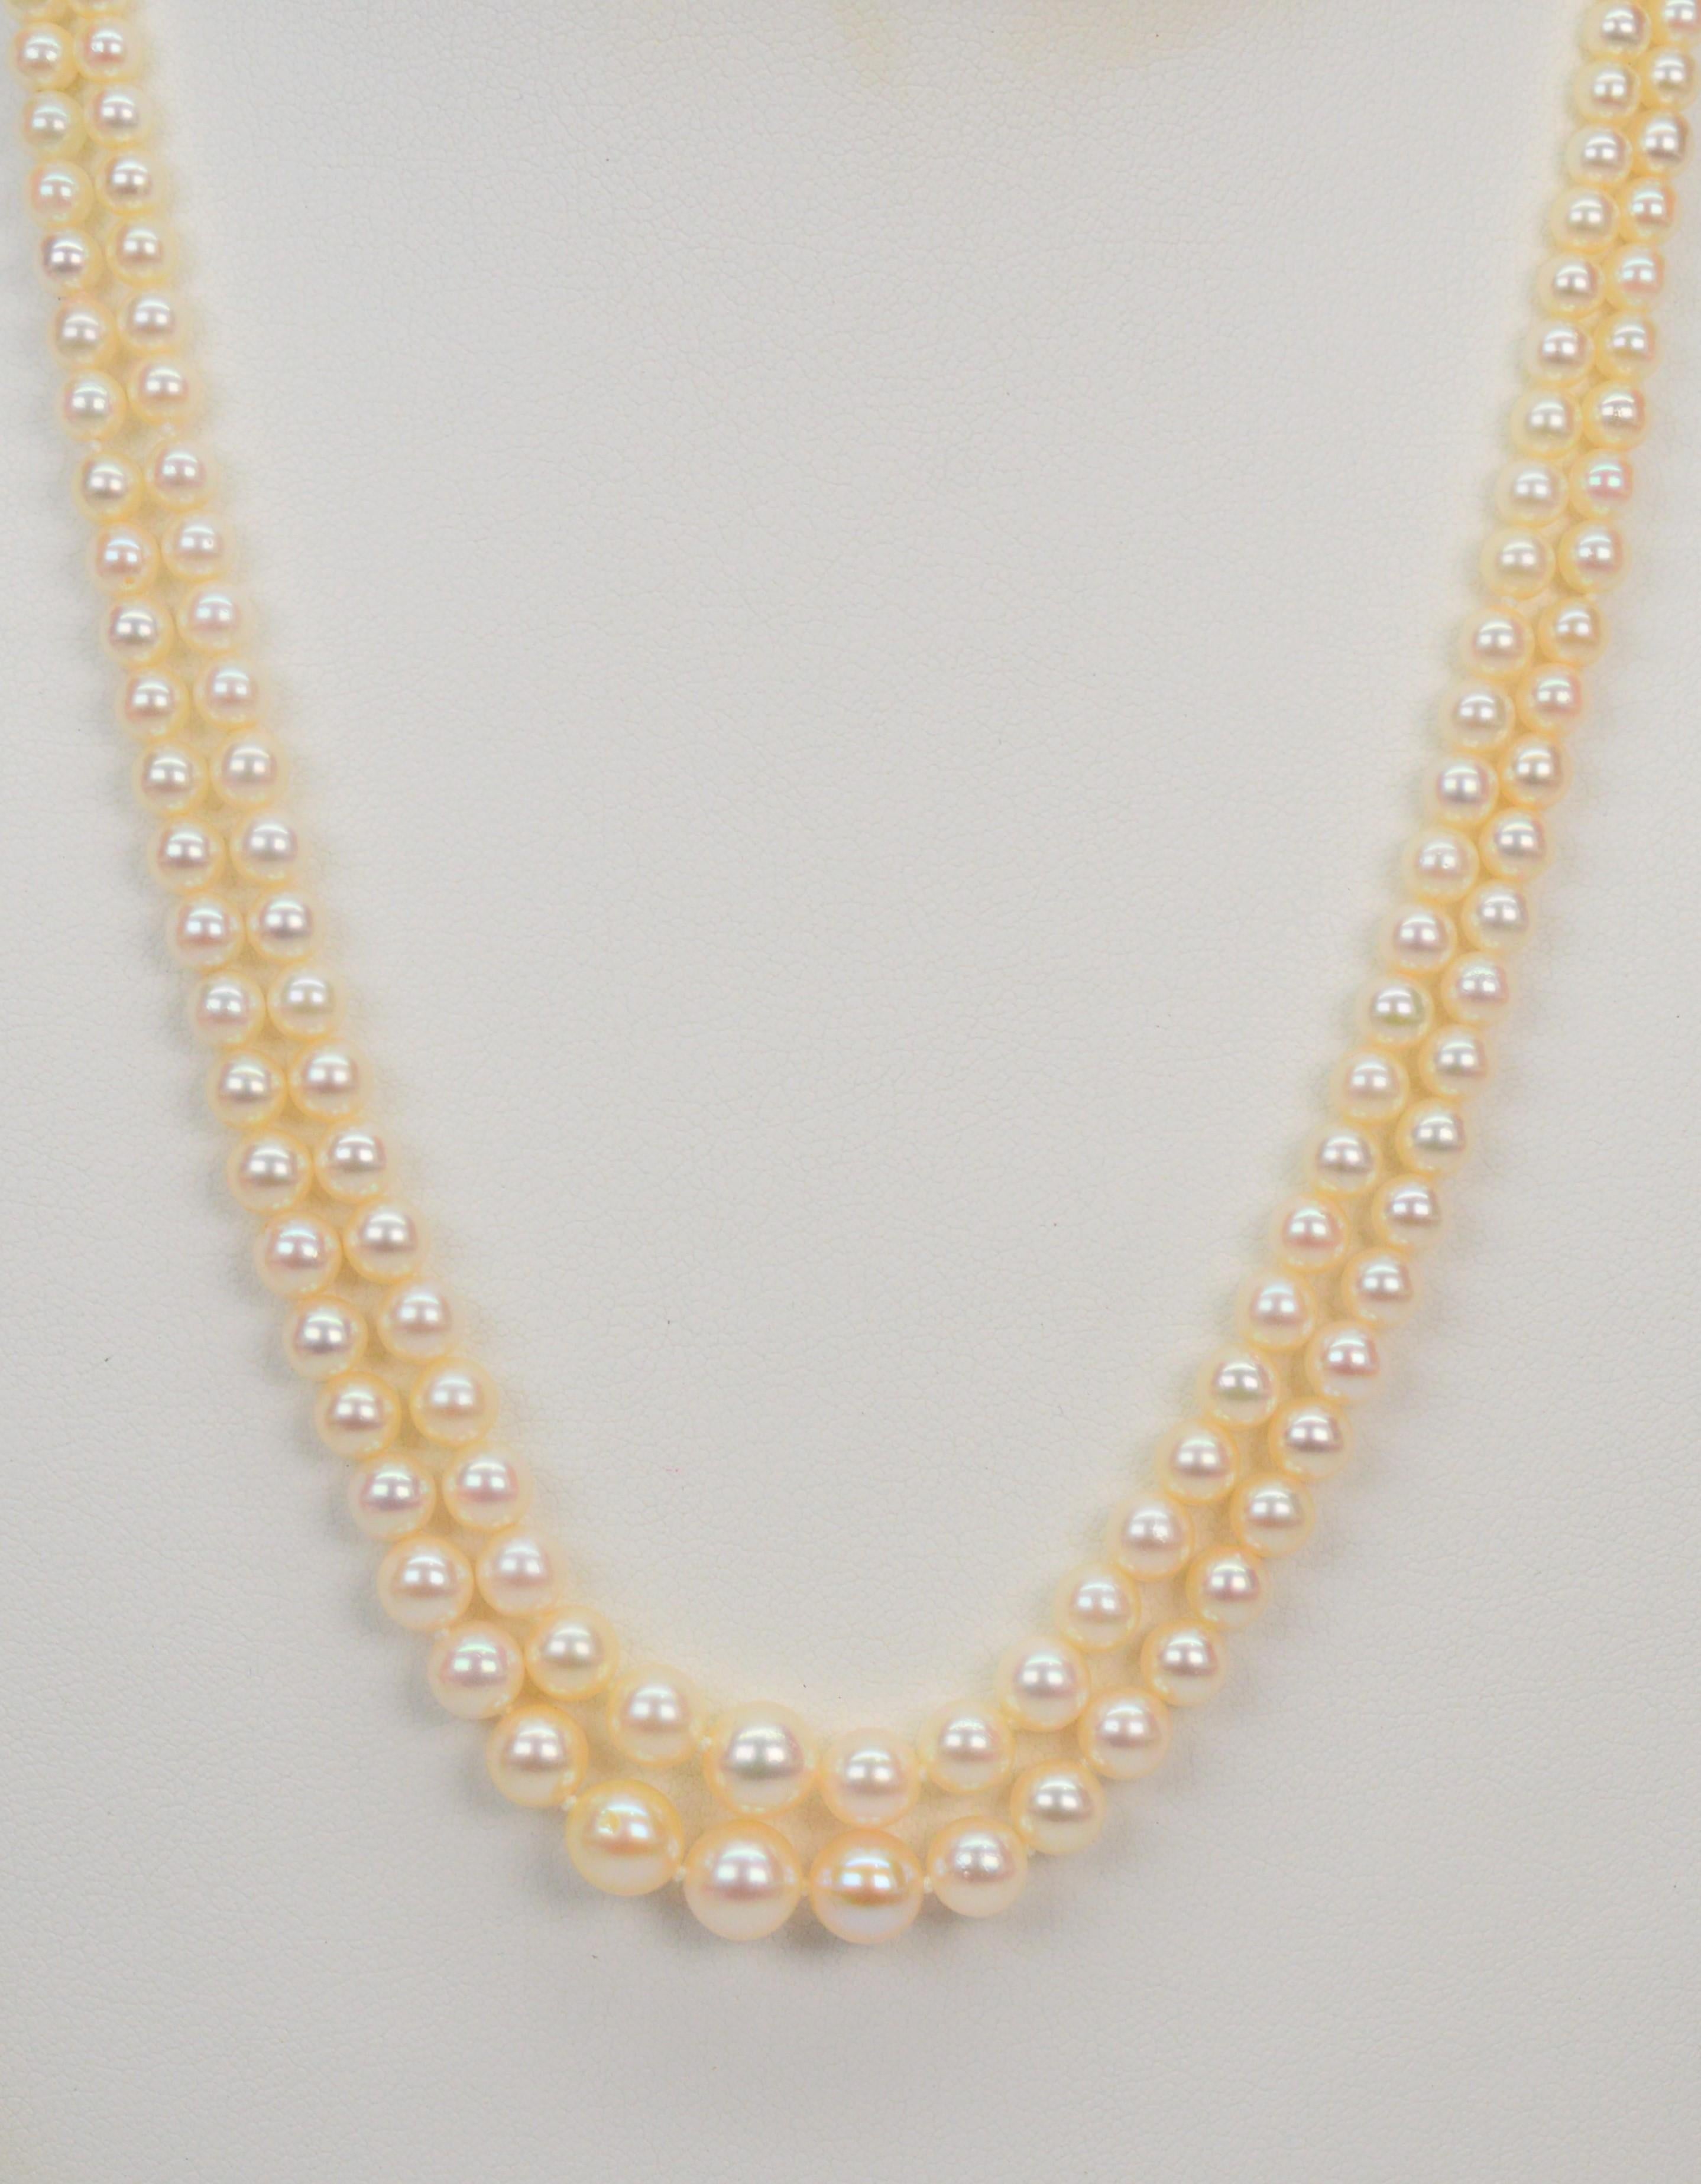 Beautifully graduated AAA pearls ranging from in size from 3mm to 6.5mm are hand strung on two nested strands to create this 18 inch necklace. 
Elegantly finished with a ten karat 10k white gold filigree clasp. Gift boxed.